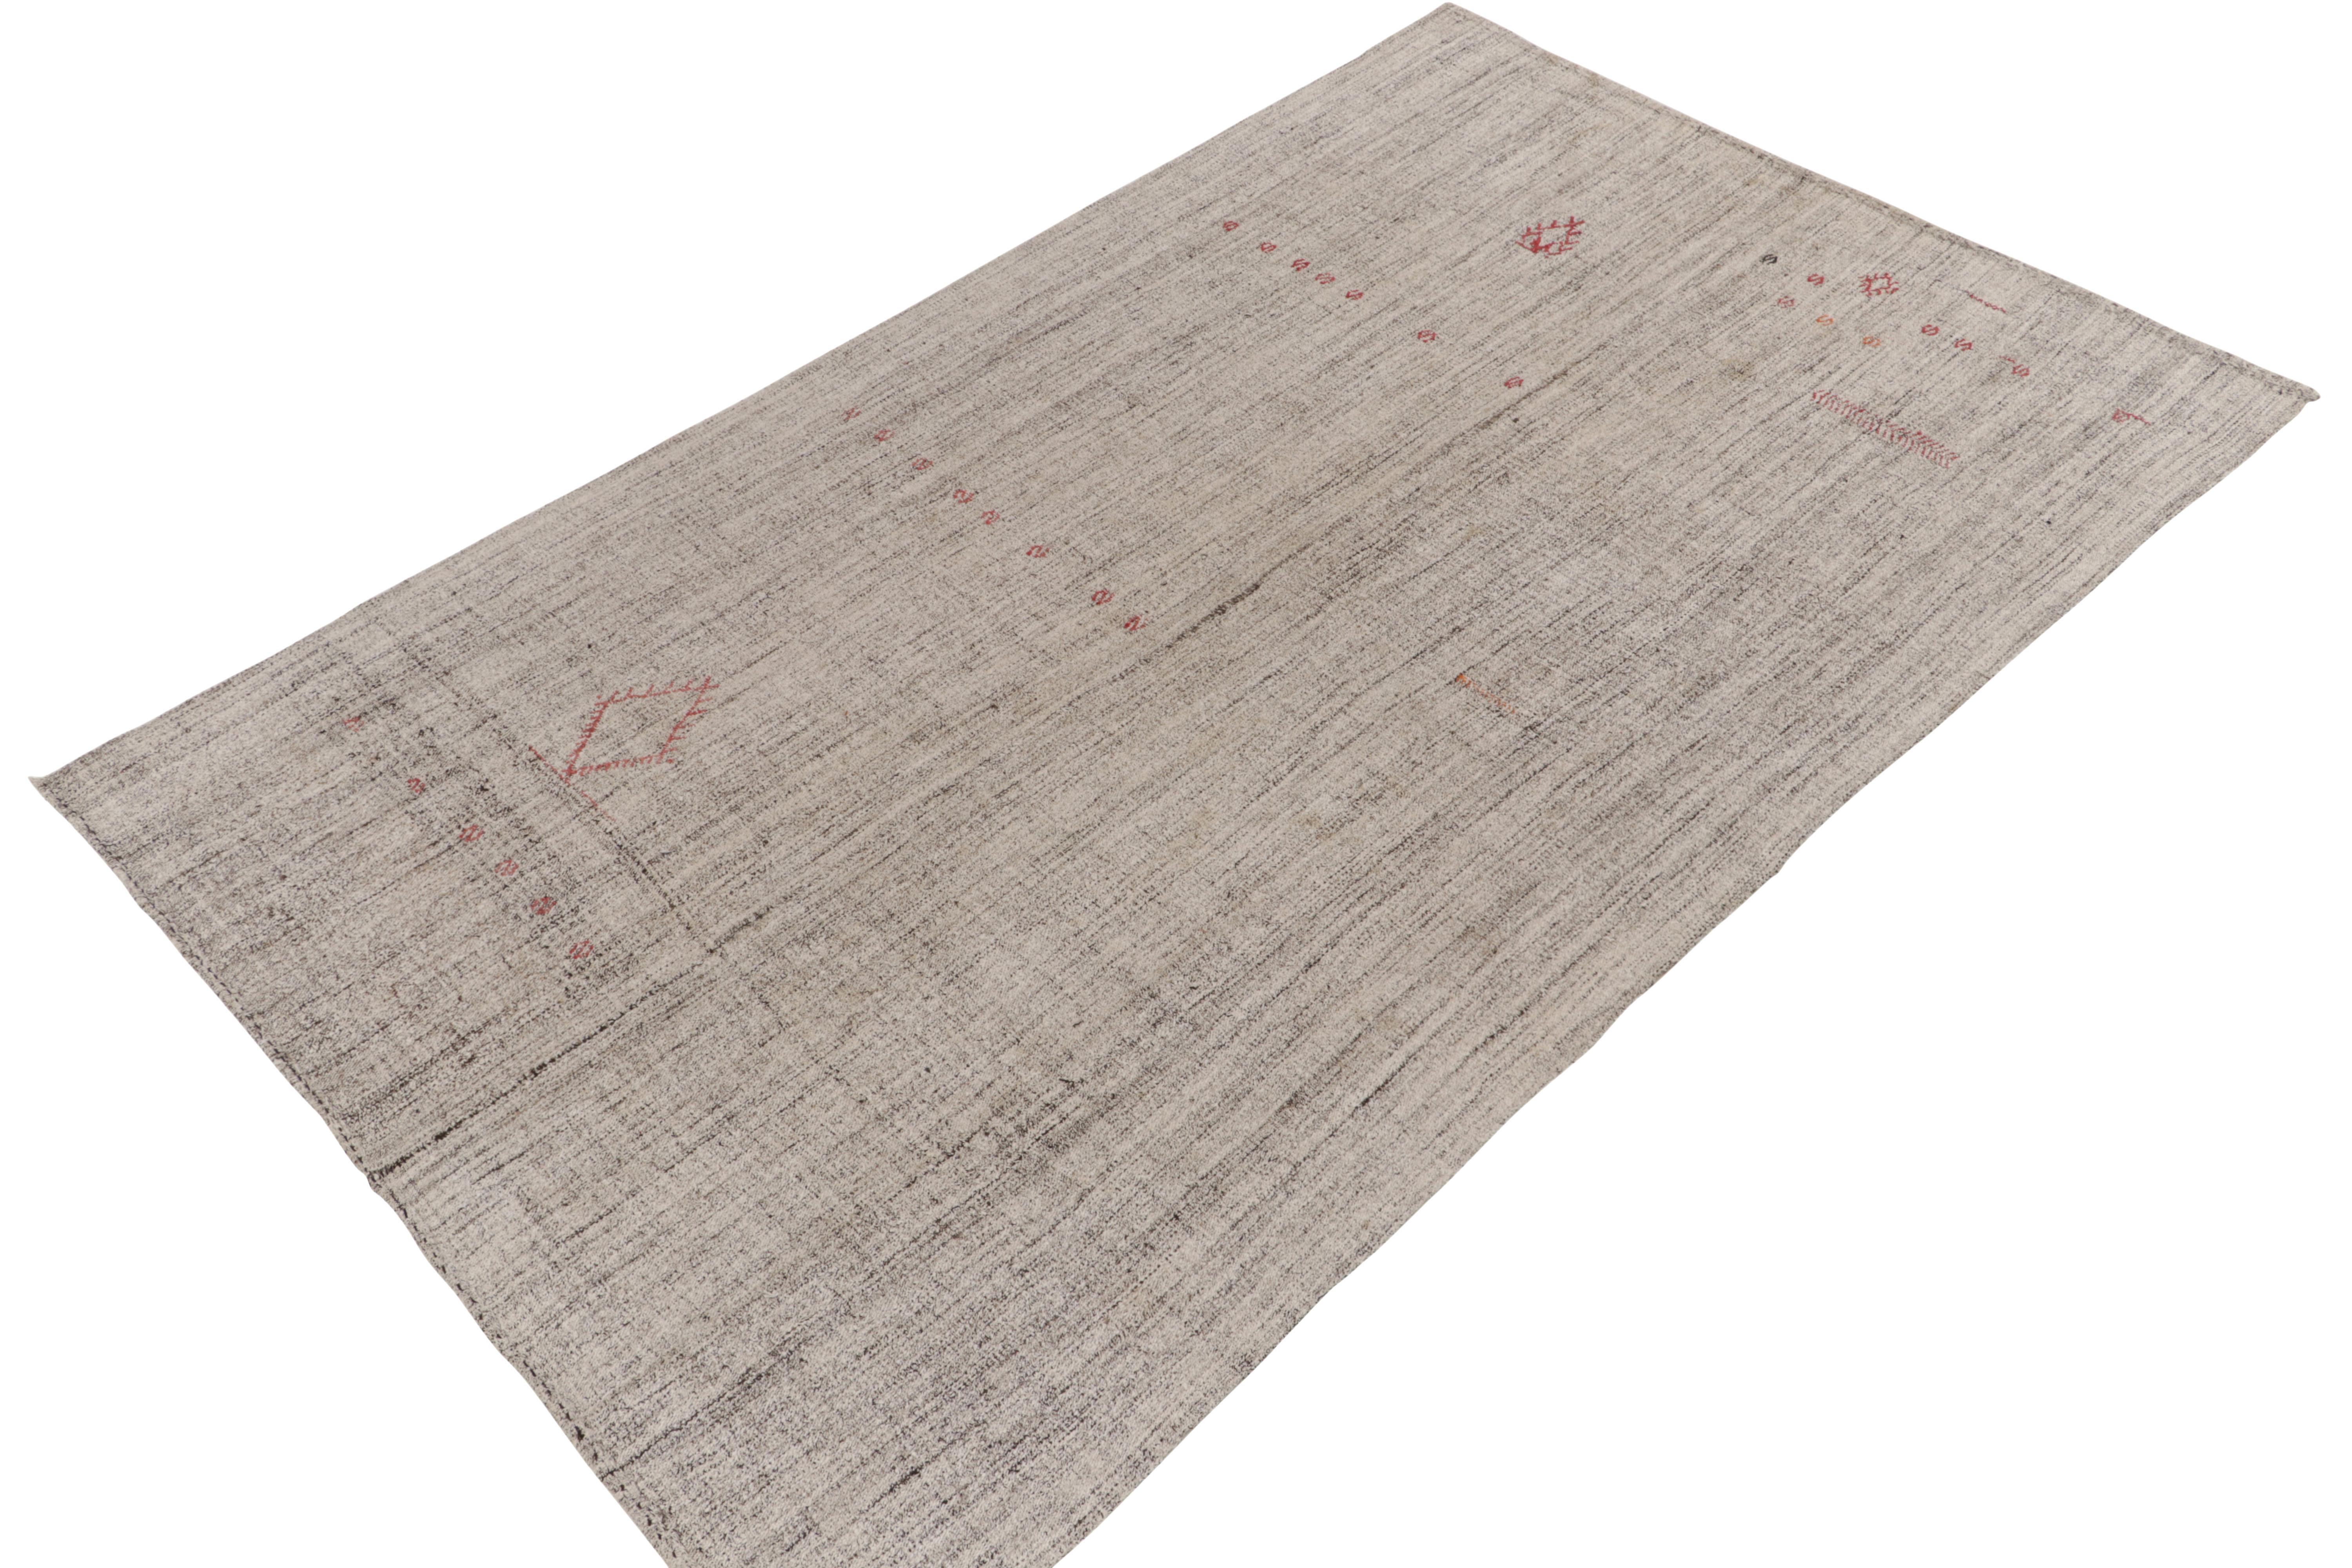 Turkish Rug & Kilim's Modern Kilim Striped Beige Gray and Green Transitional Flat-Weave For Sale